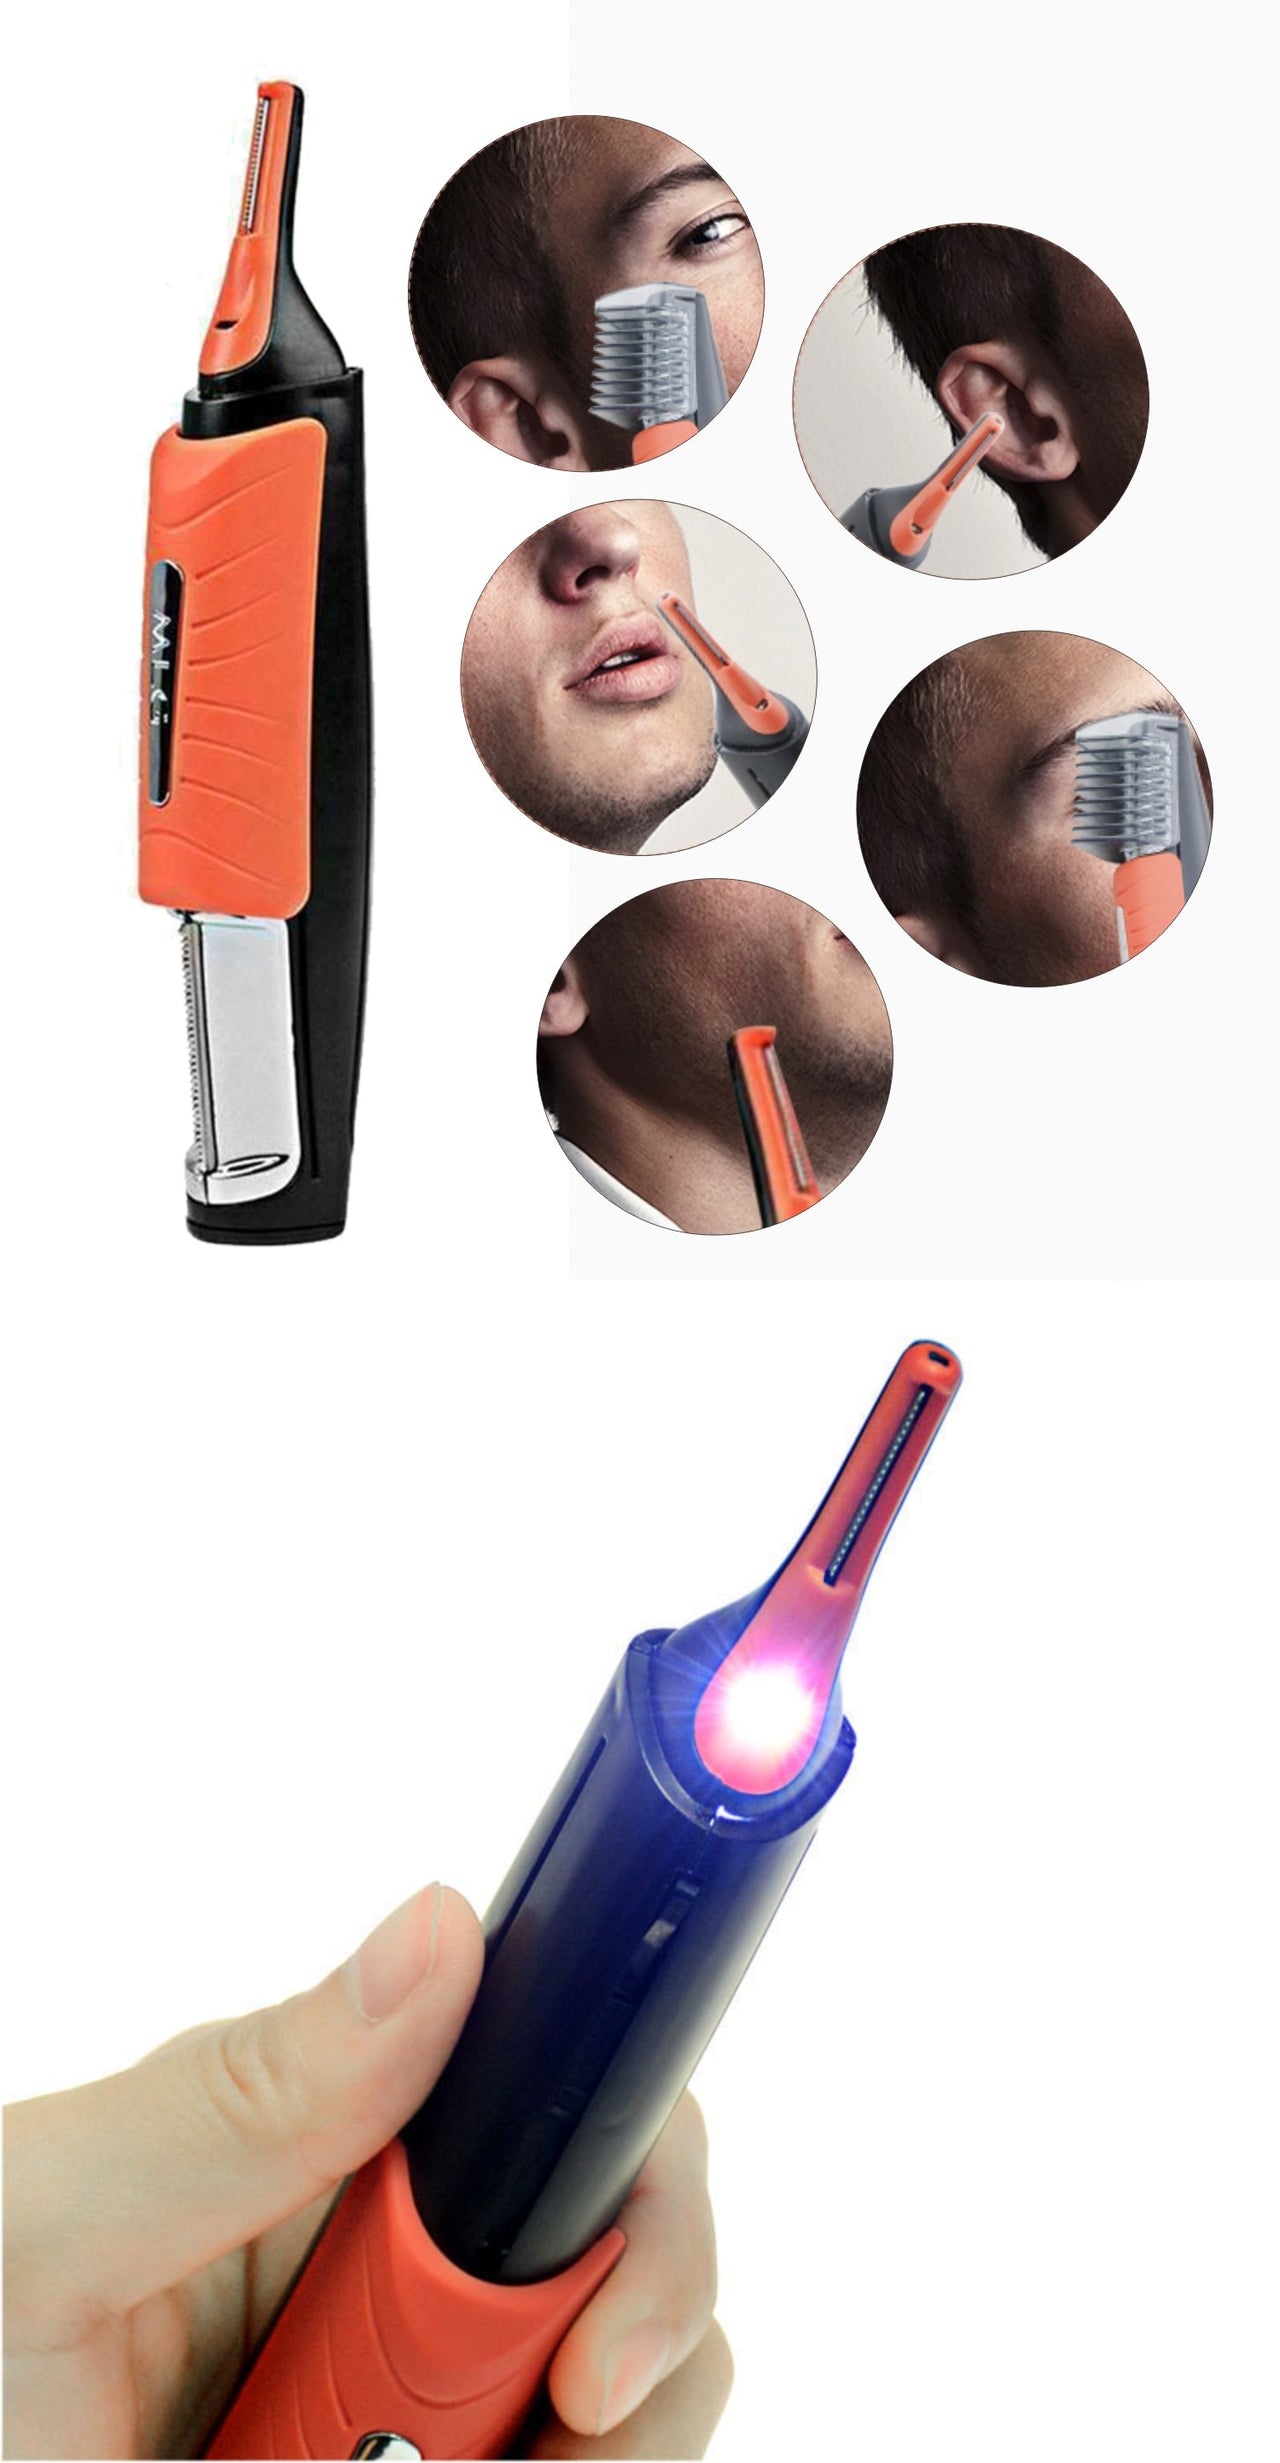 All in One Hair Trimmer - thedealzninja